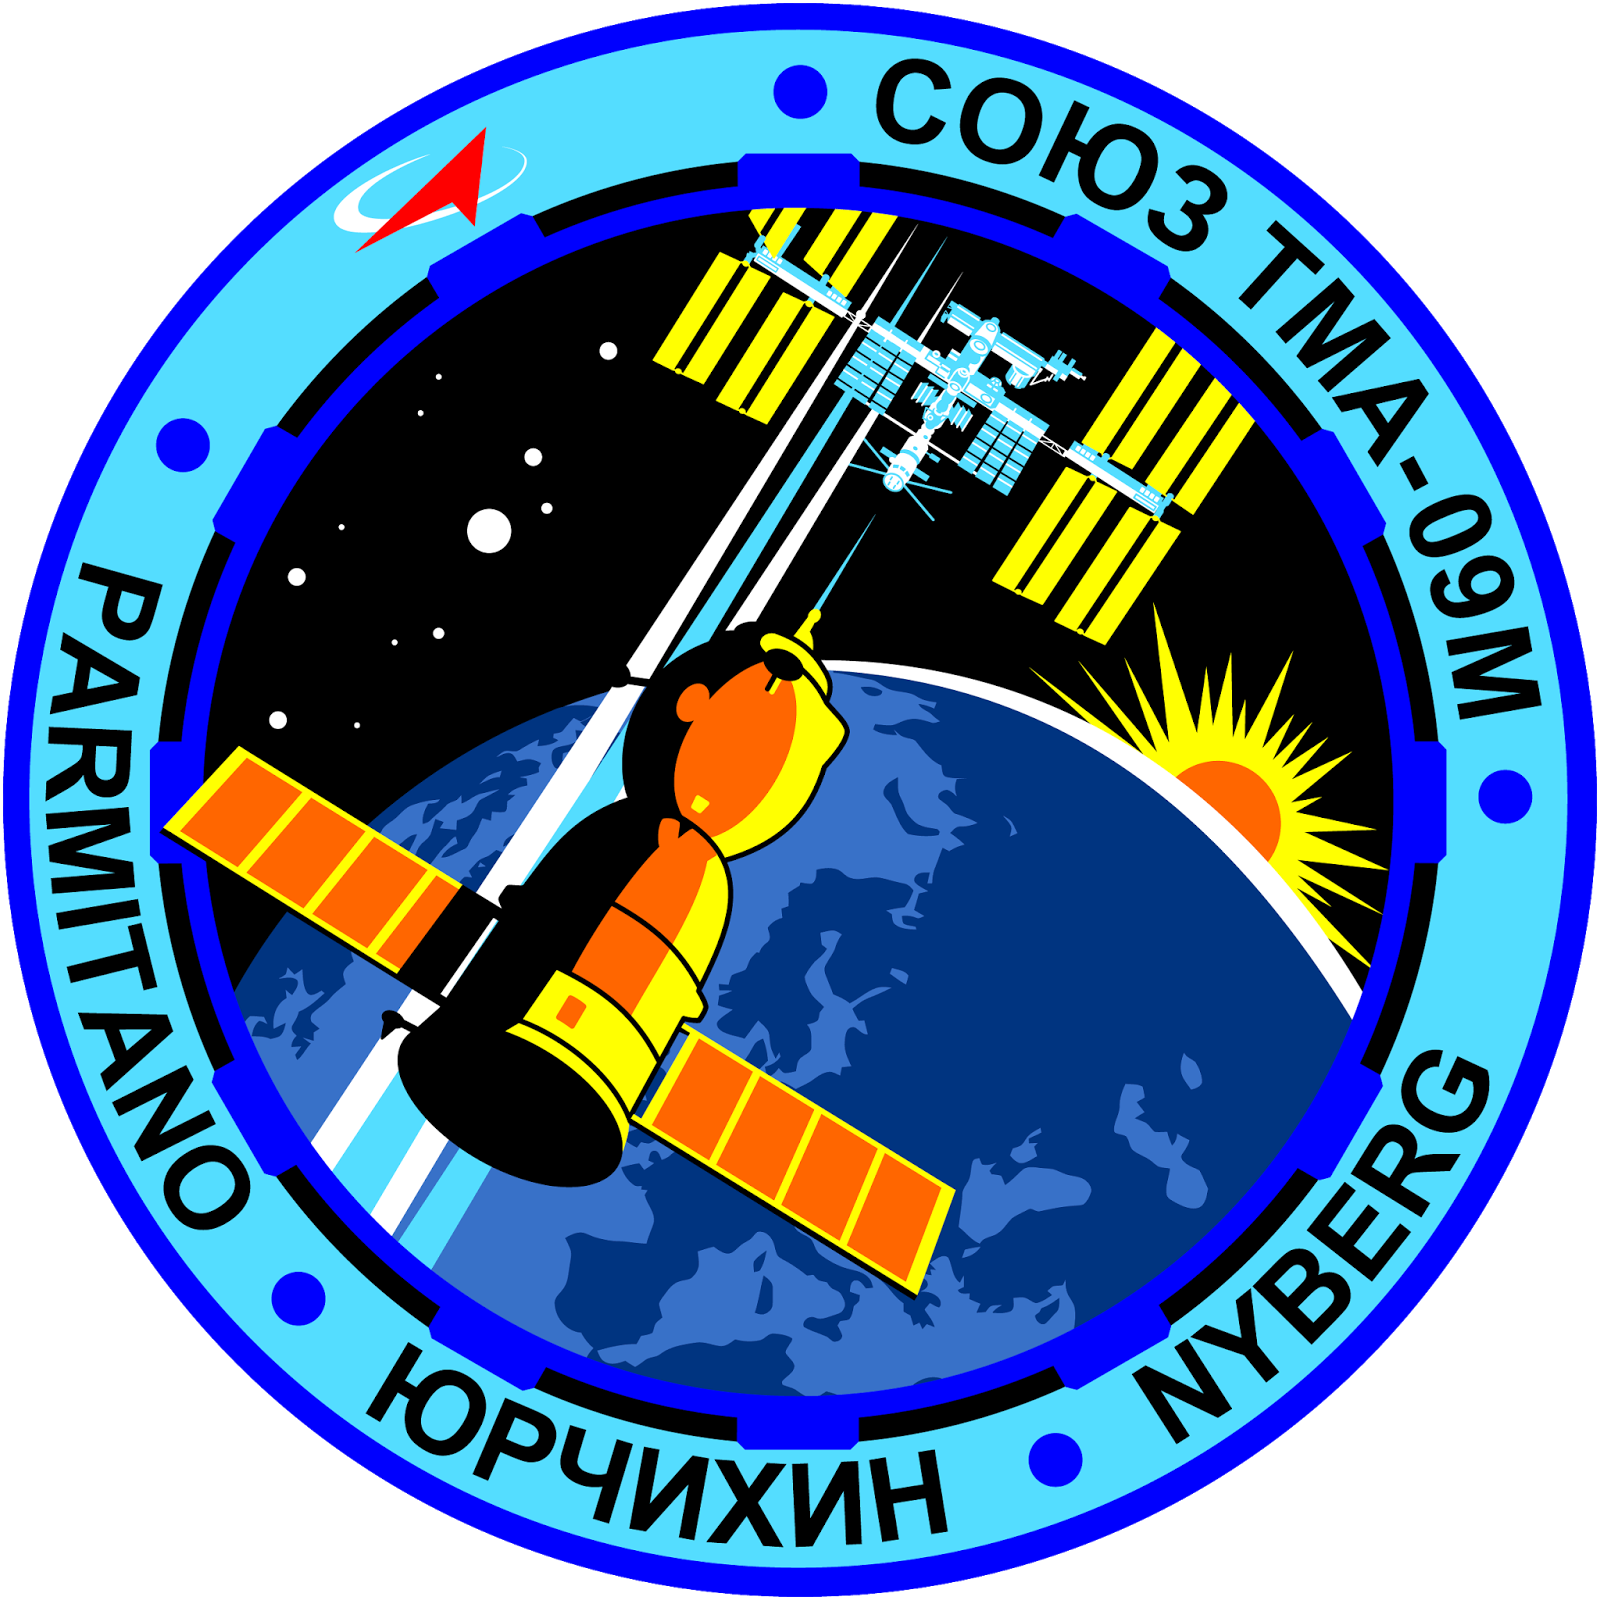 Orbiter ch space expedition. News clipart news crew